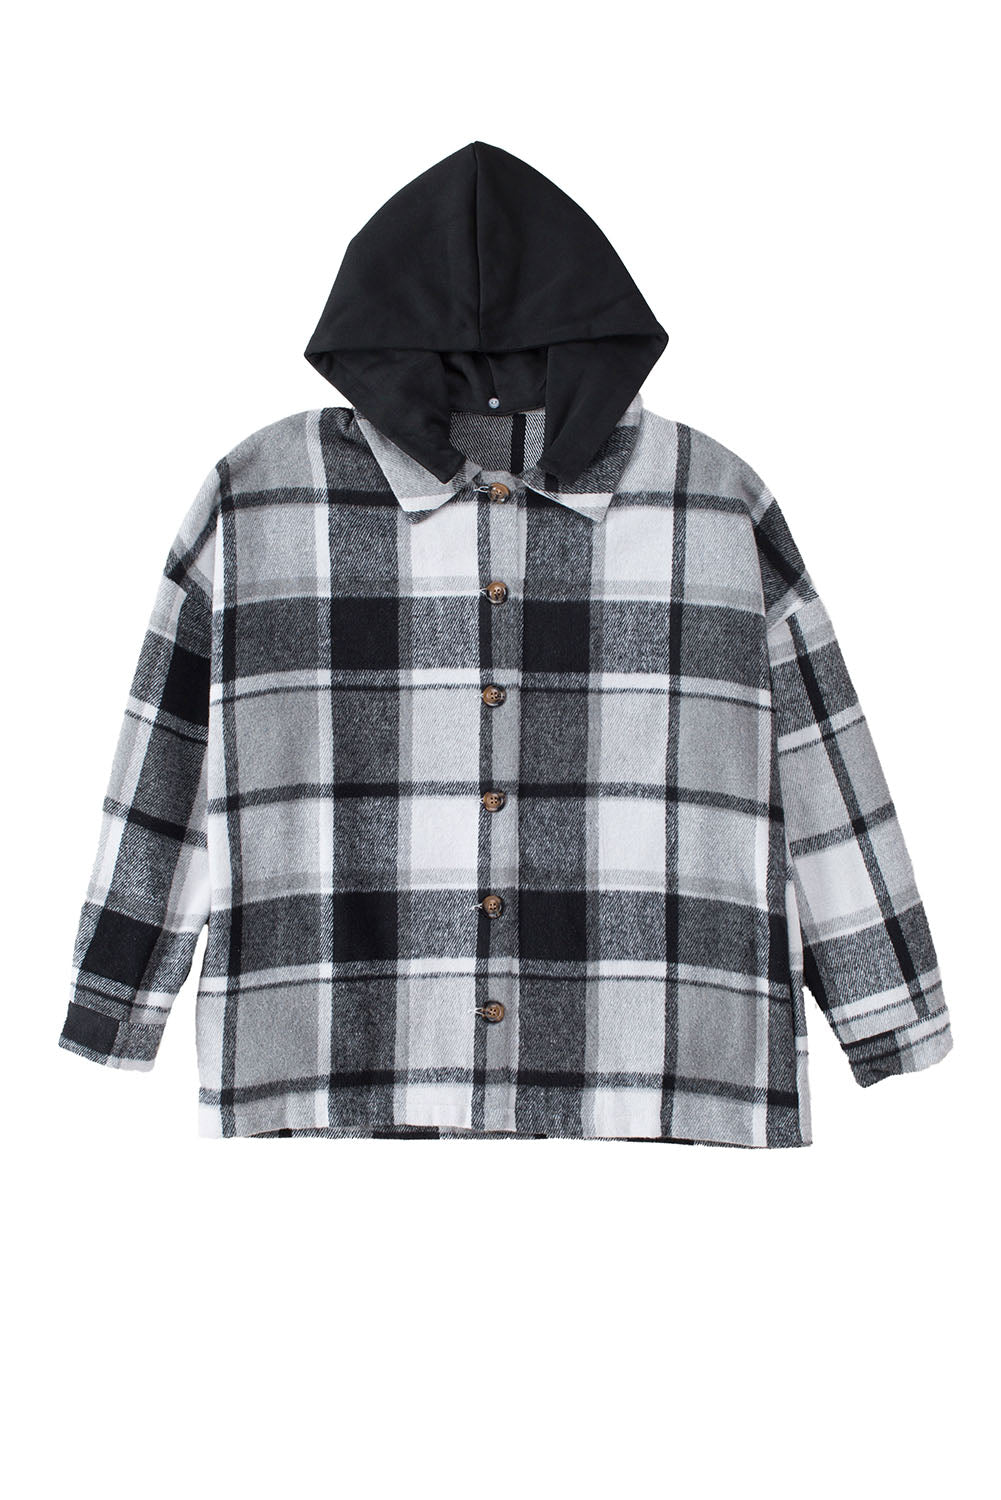 Orange Hooded Plaid Button Front Shacket